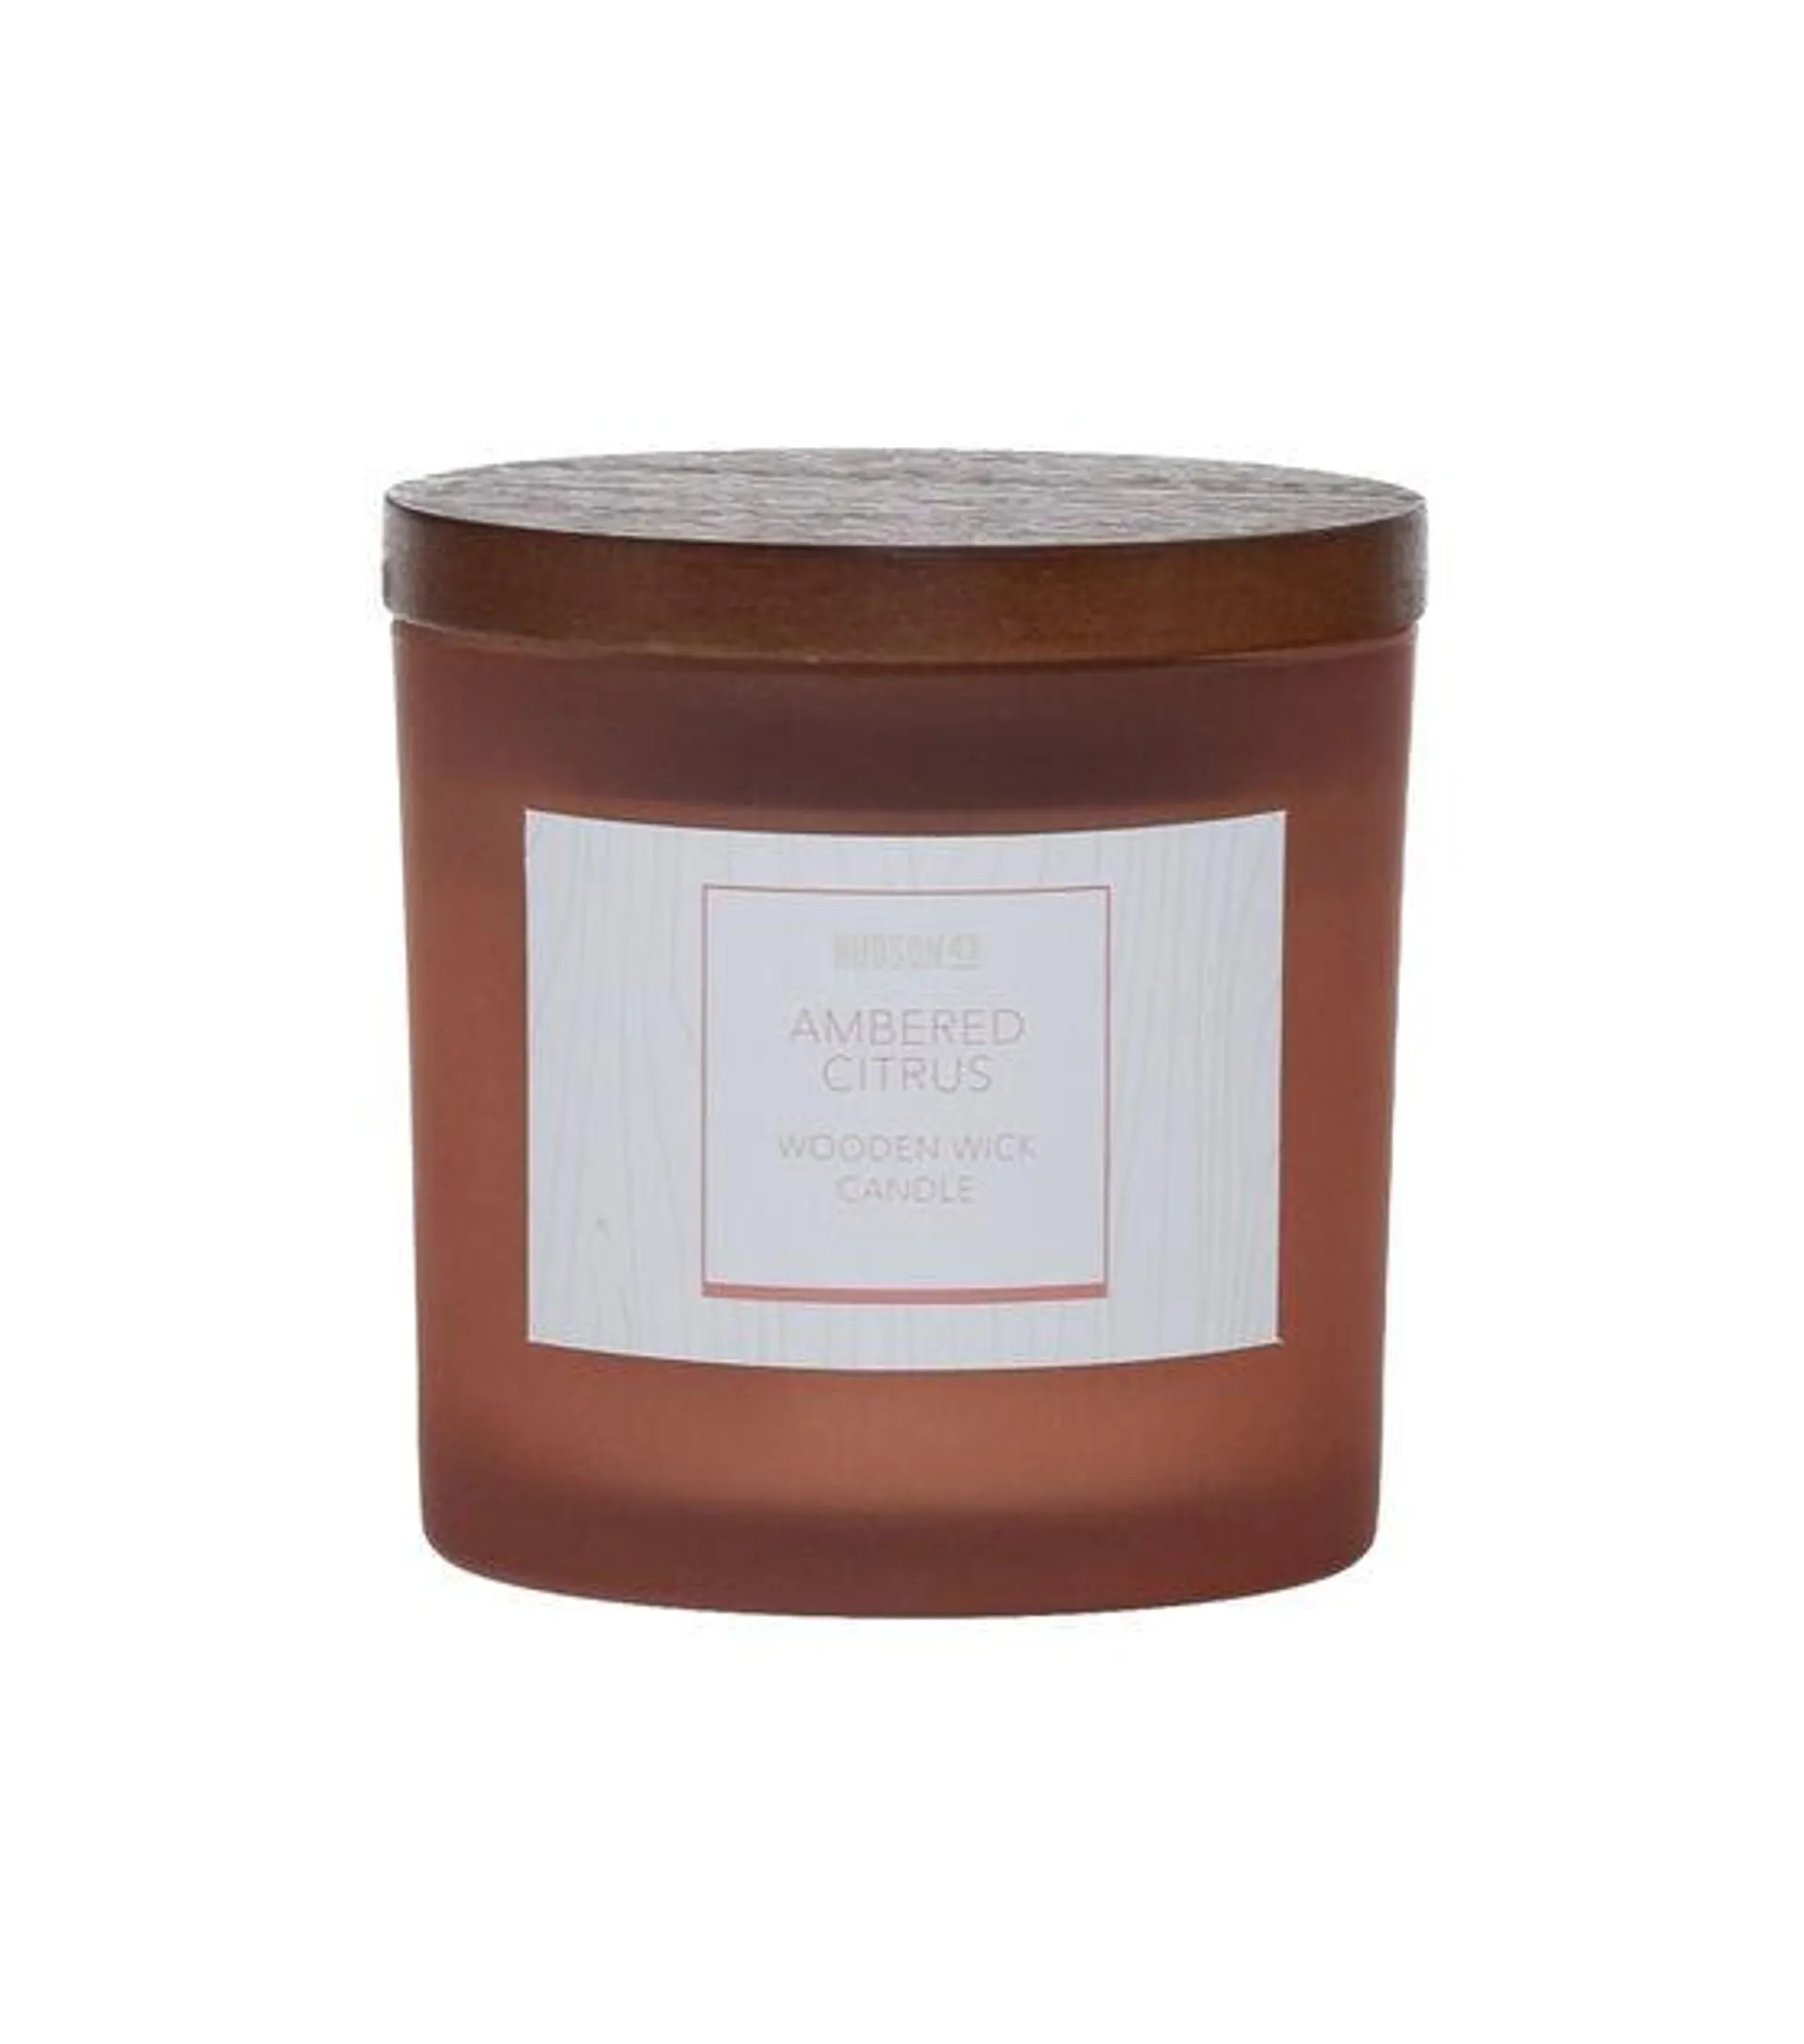 Hudson 43 Wooden Wick Frosted Candle 5oz Ambered Citrus Orange